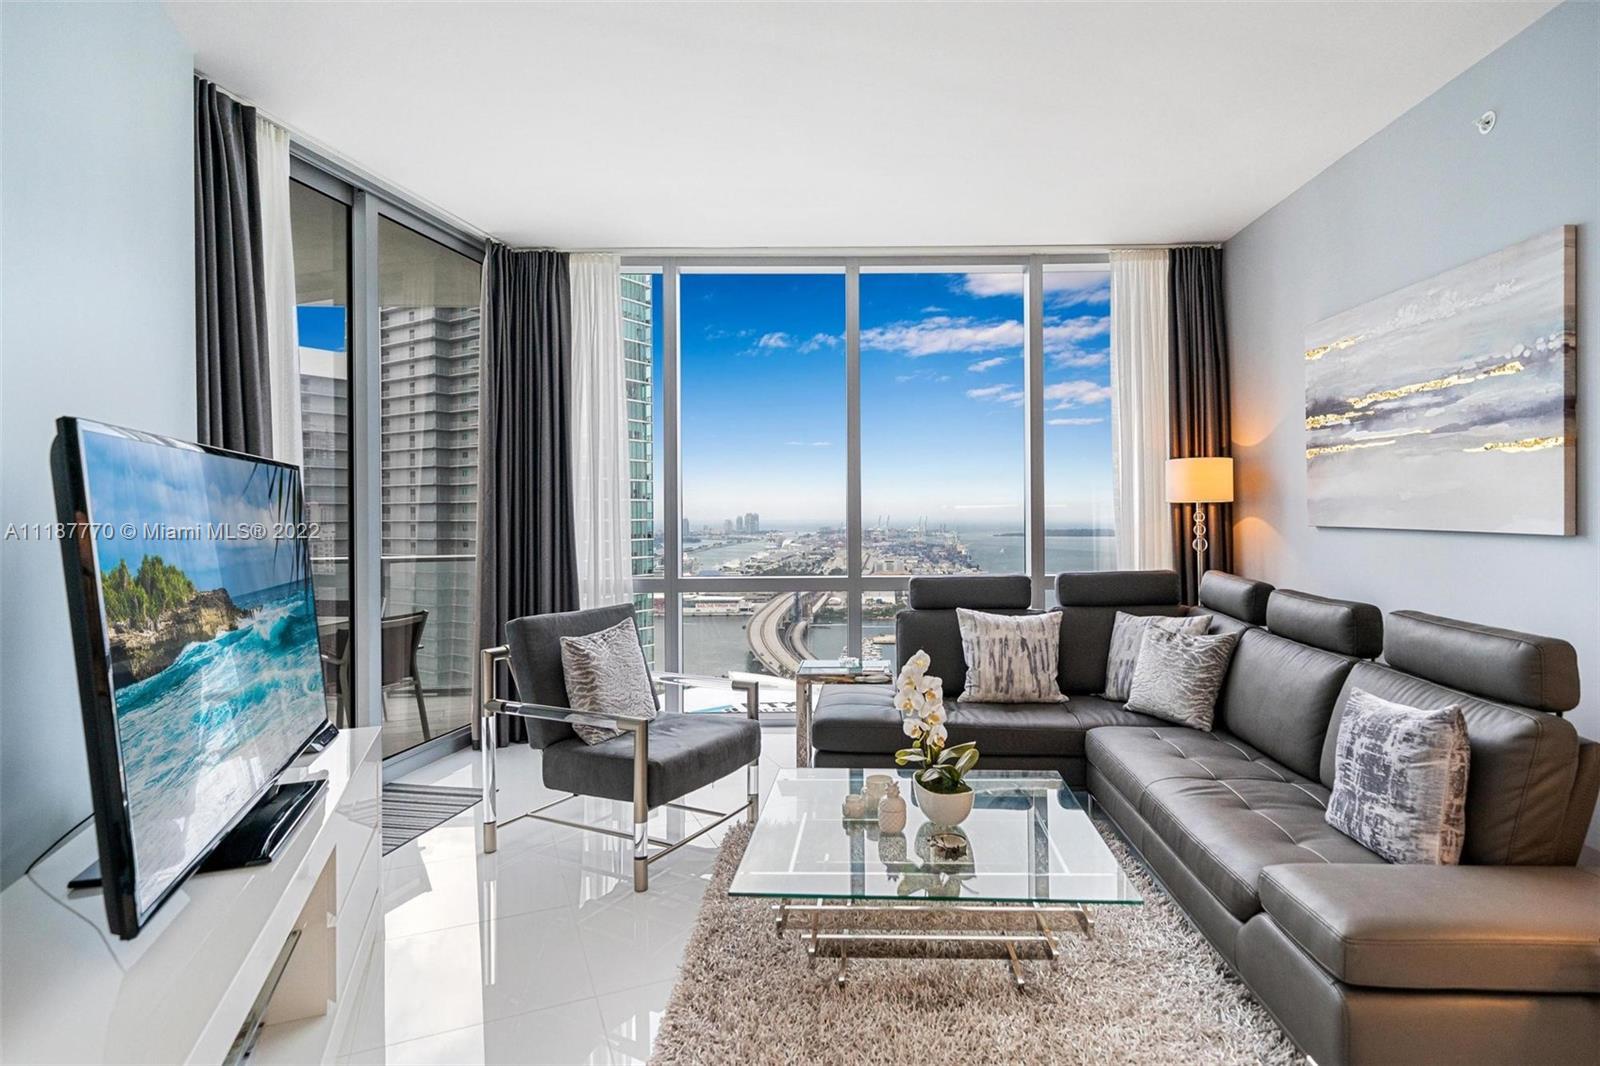 Enjoy the Miami lifestyle from this beautiful 2 bed /3 full bath + den unit with stunning views of t